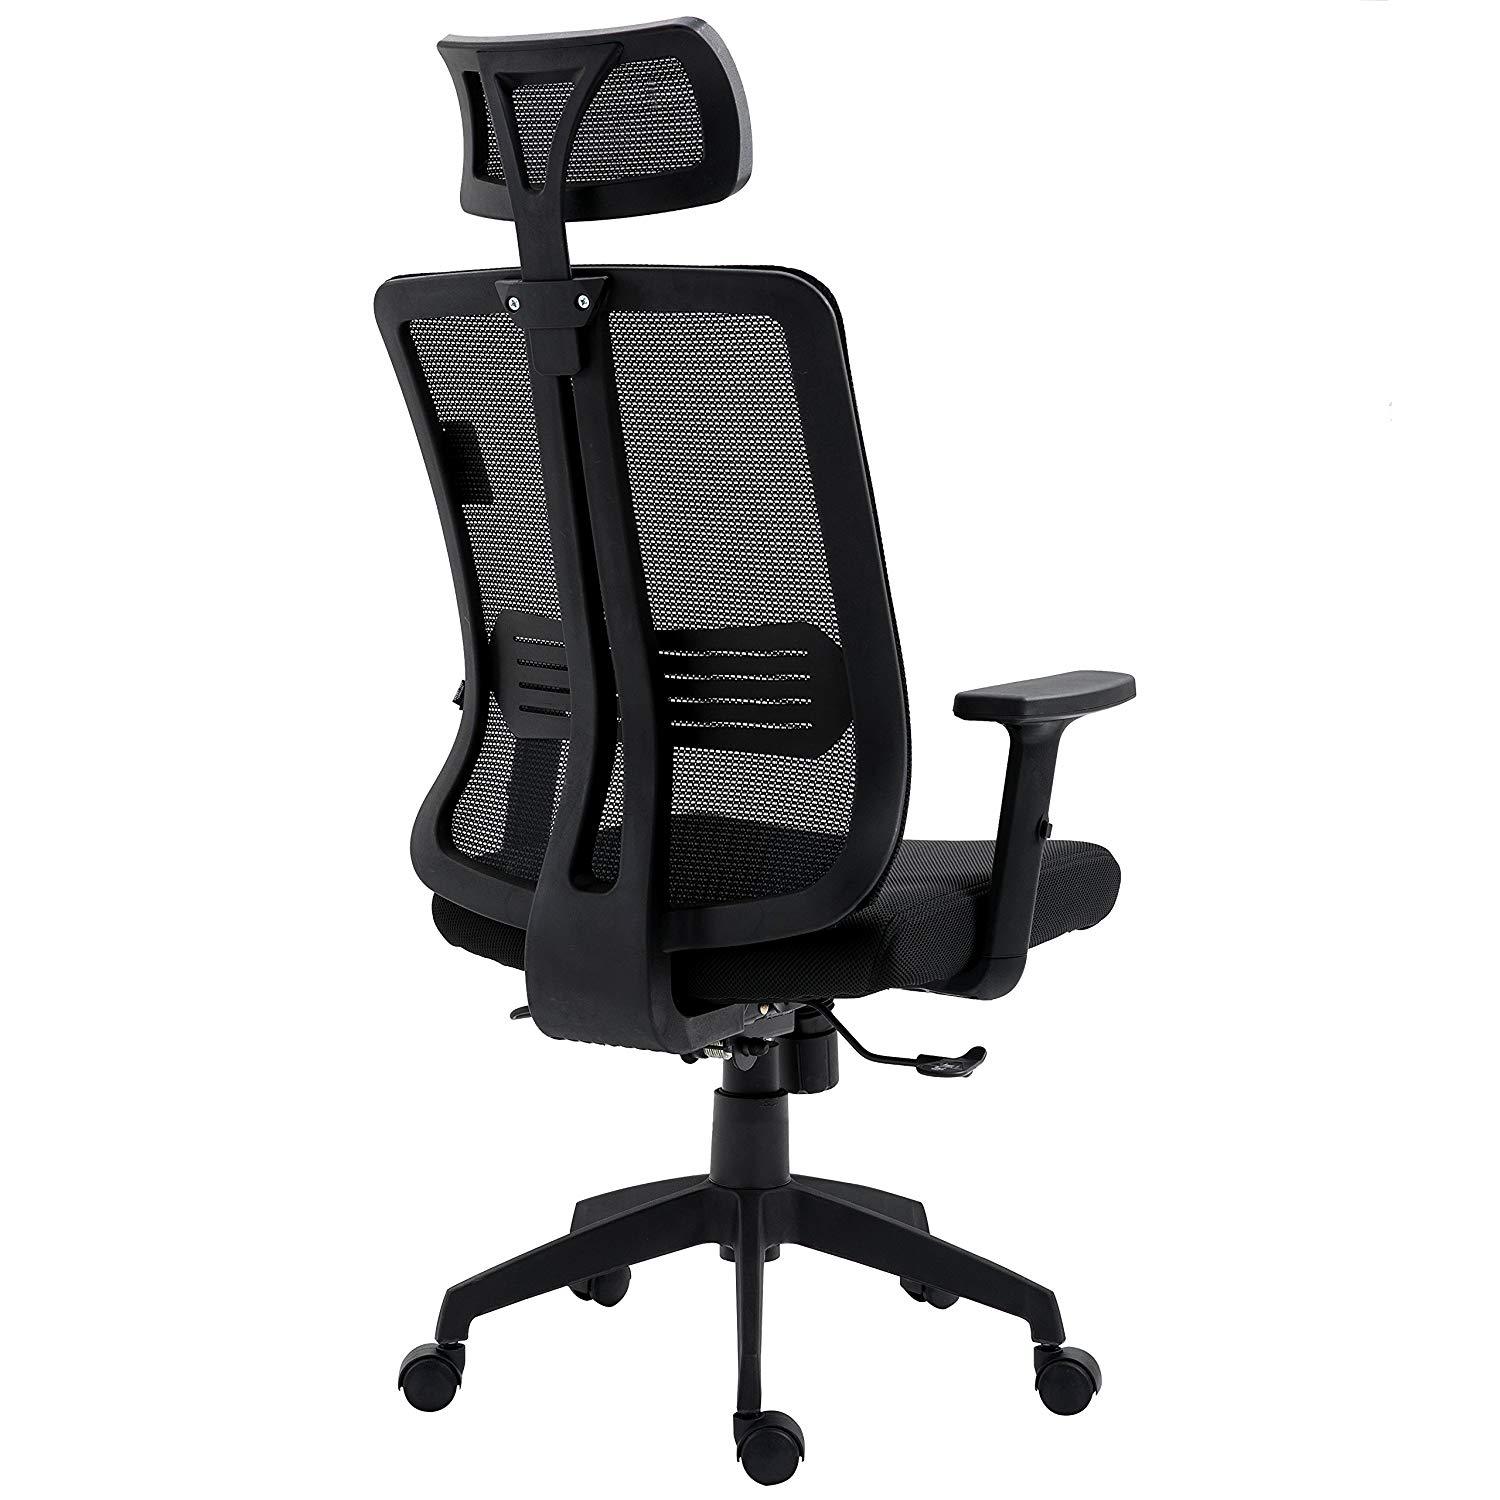 Black Mesh High Back Executive Office Chair Swivel Desk Chair with